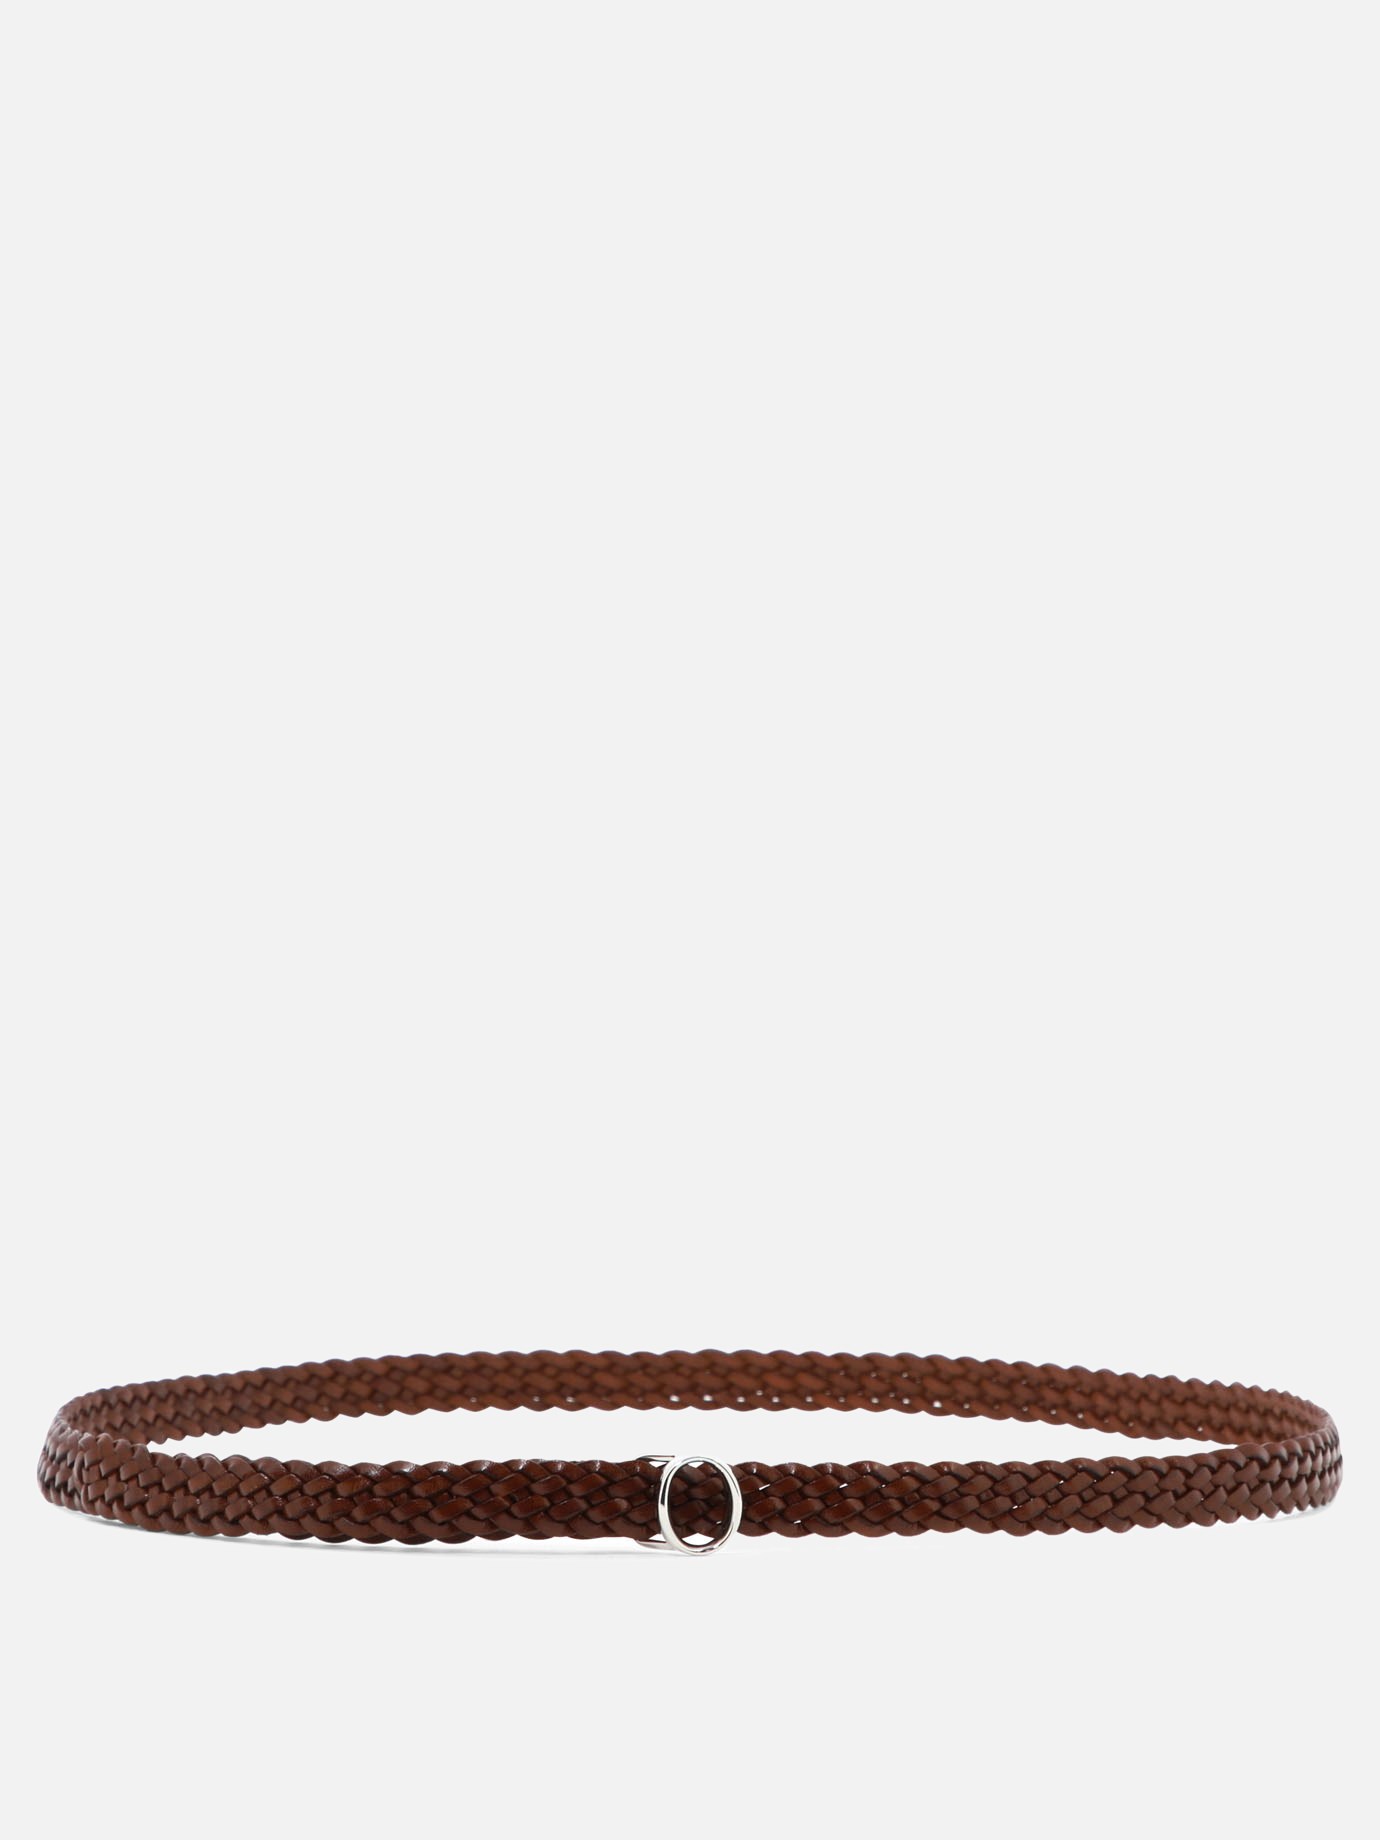 Woven leather beltby Orciani - 1